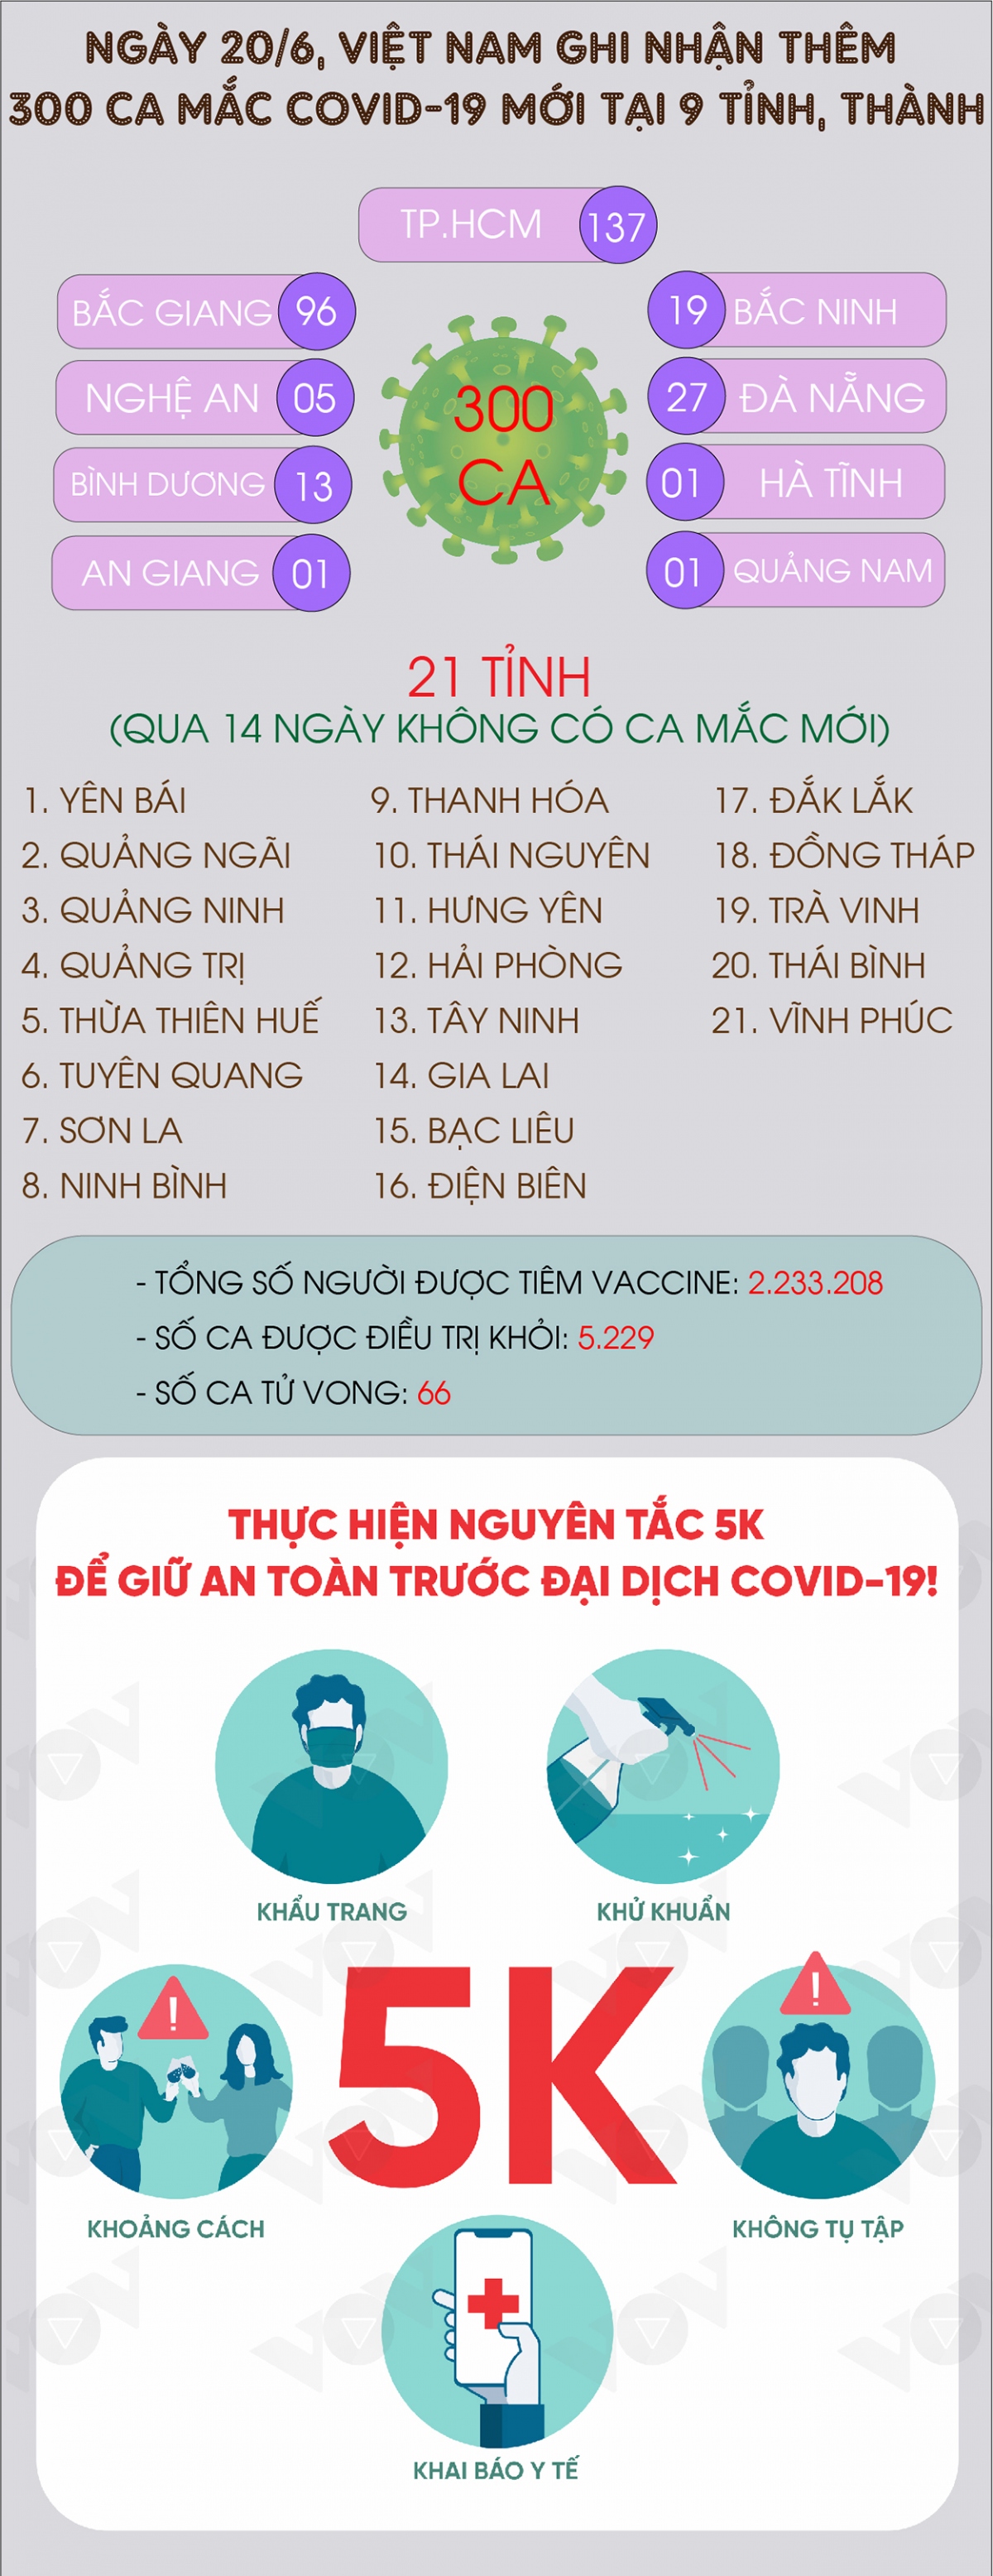 ngay 20 6, co them 300 ca mac covid-19 moi trong nuoc, rieng tp.hcm 137 ca hinh anh 1